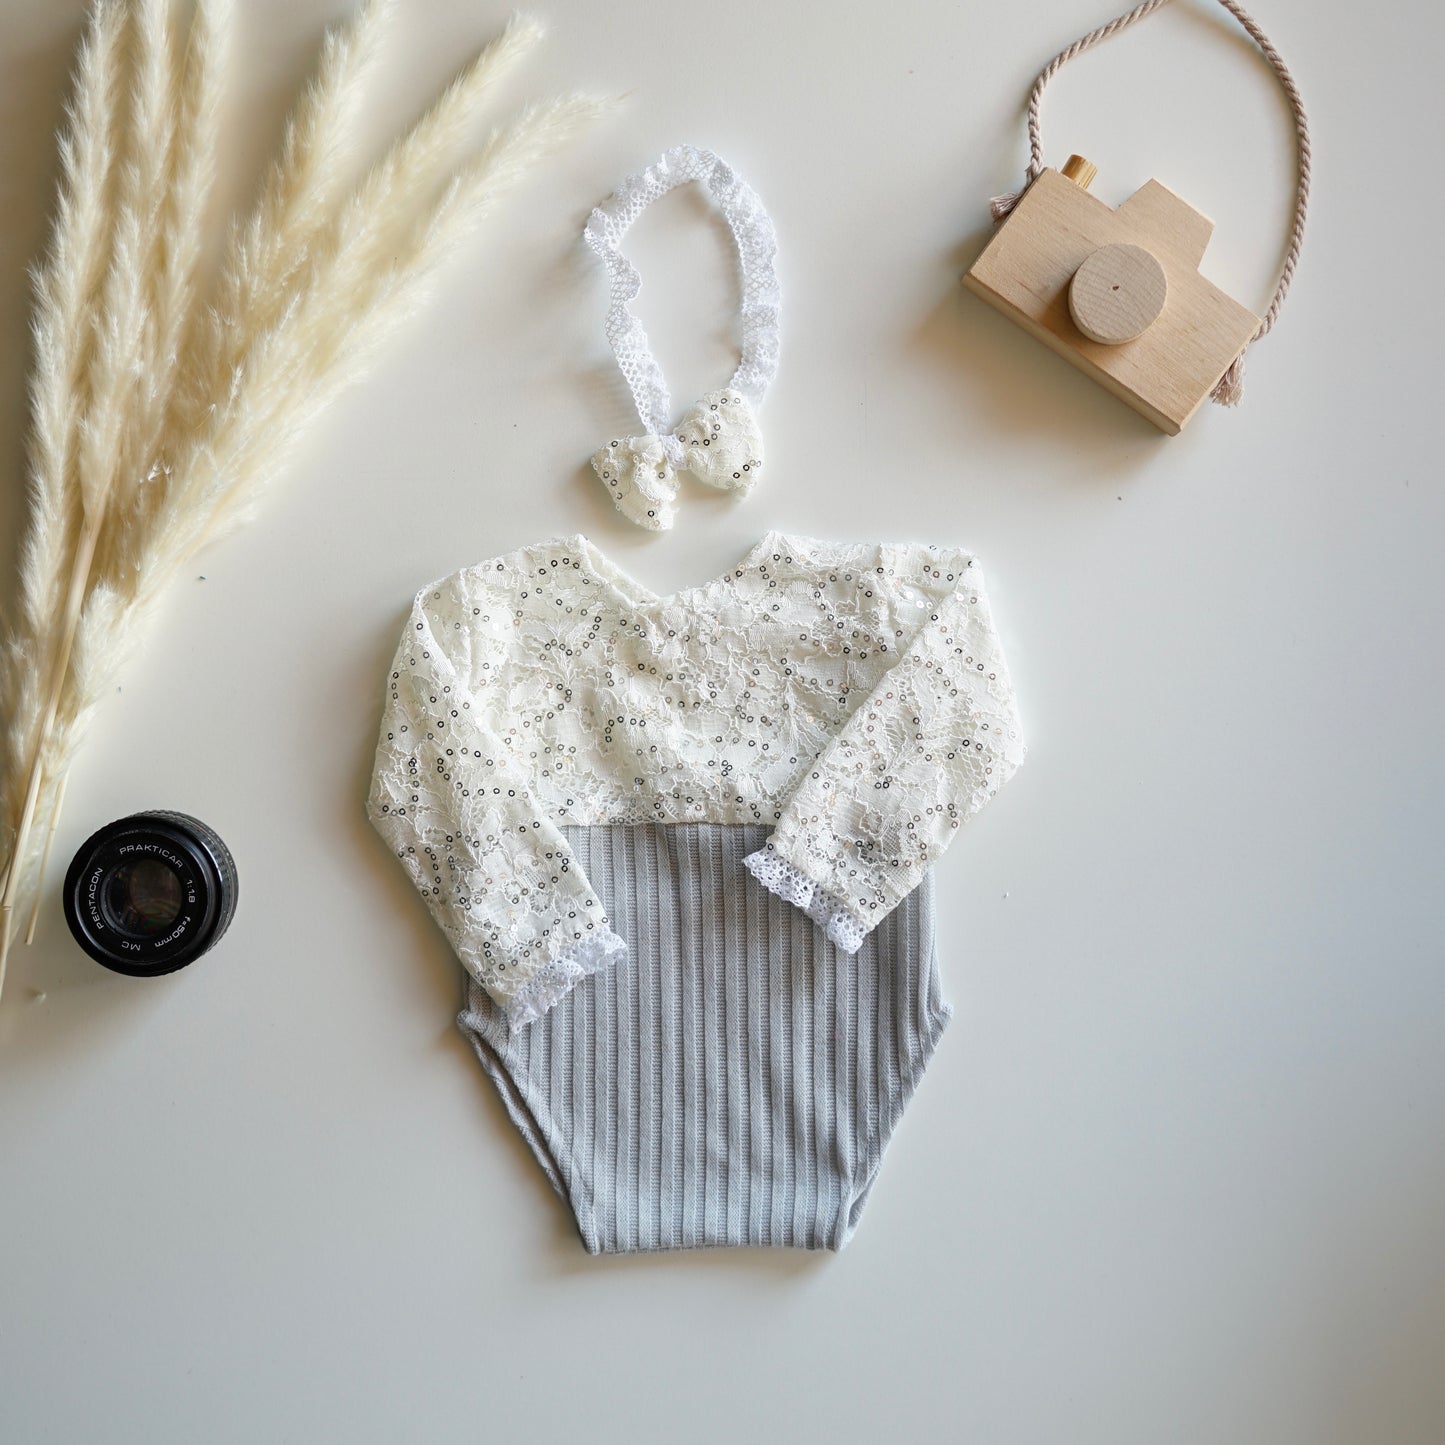 Anne grey 1 Newborn Photography Prop Outfit For Girl